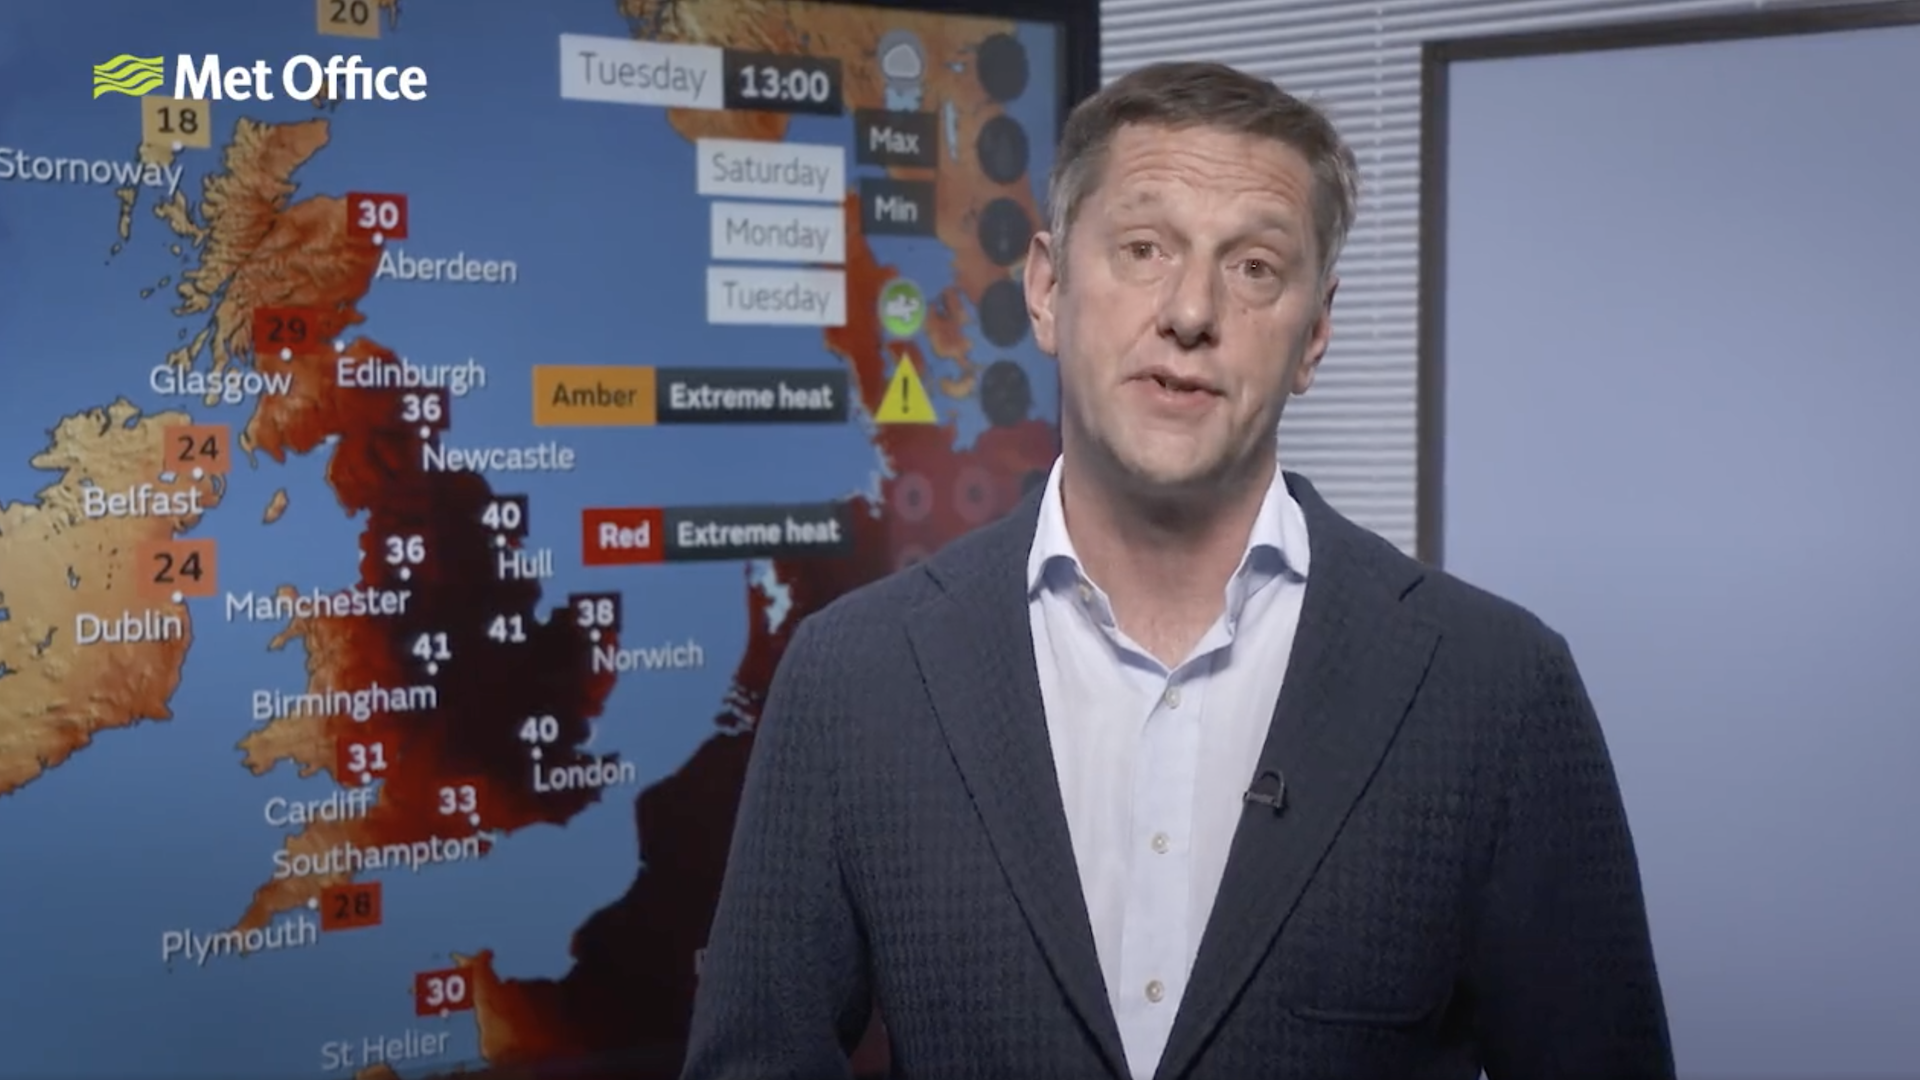 Met Office chief scientist Stephen Belcher wears a white shirt and grey cardigan in front of a map showing record temperatures of 40C across the UK